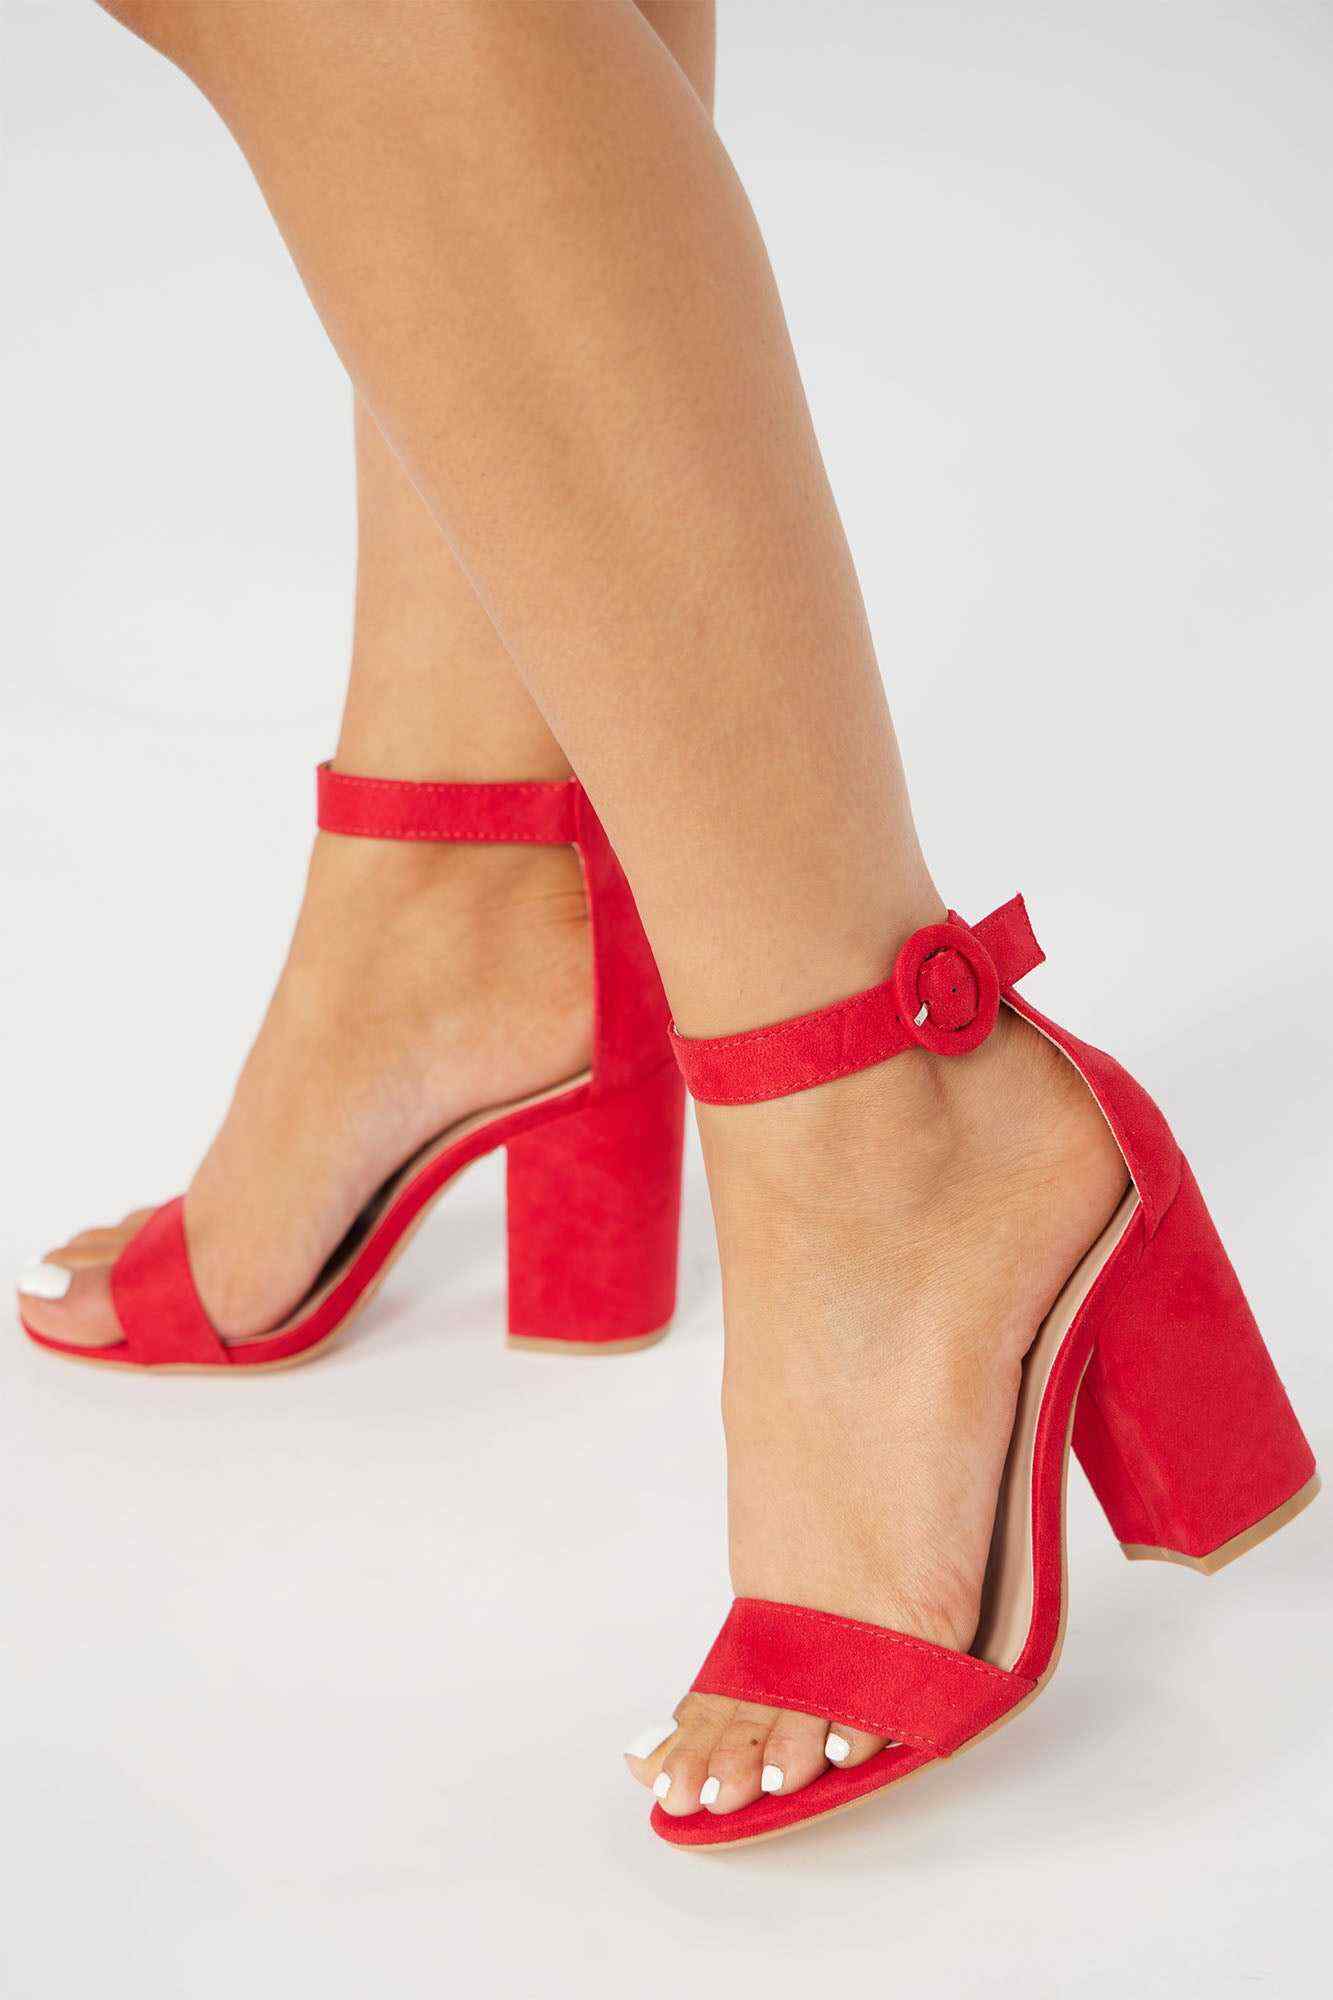 Staying Awhile Heeled Sandals   Red